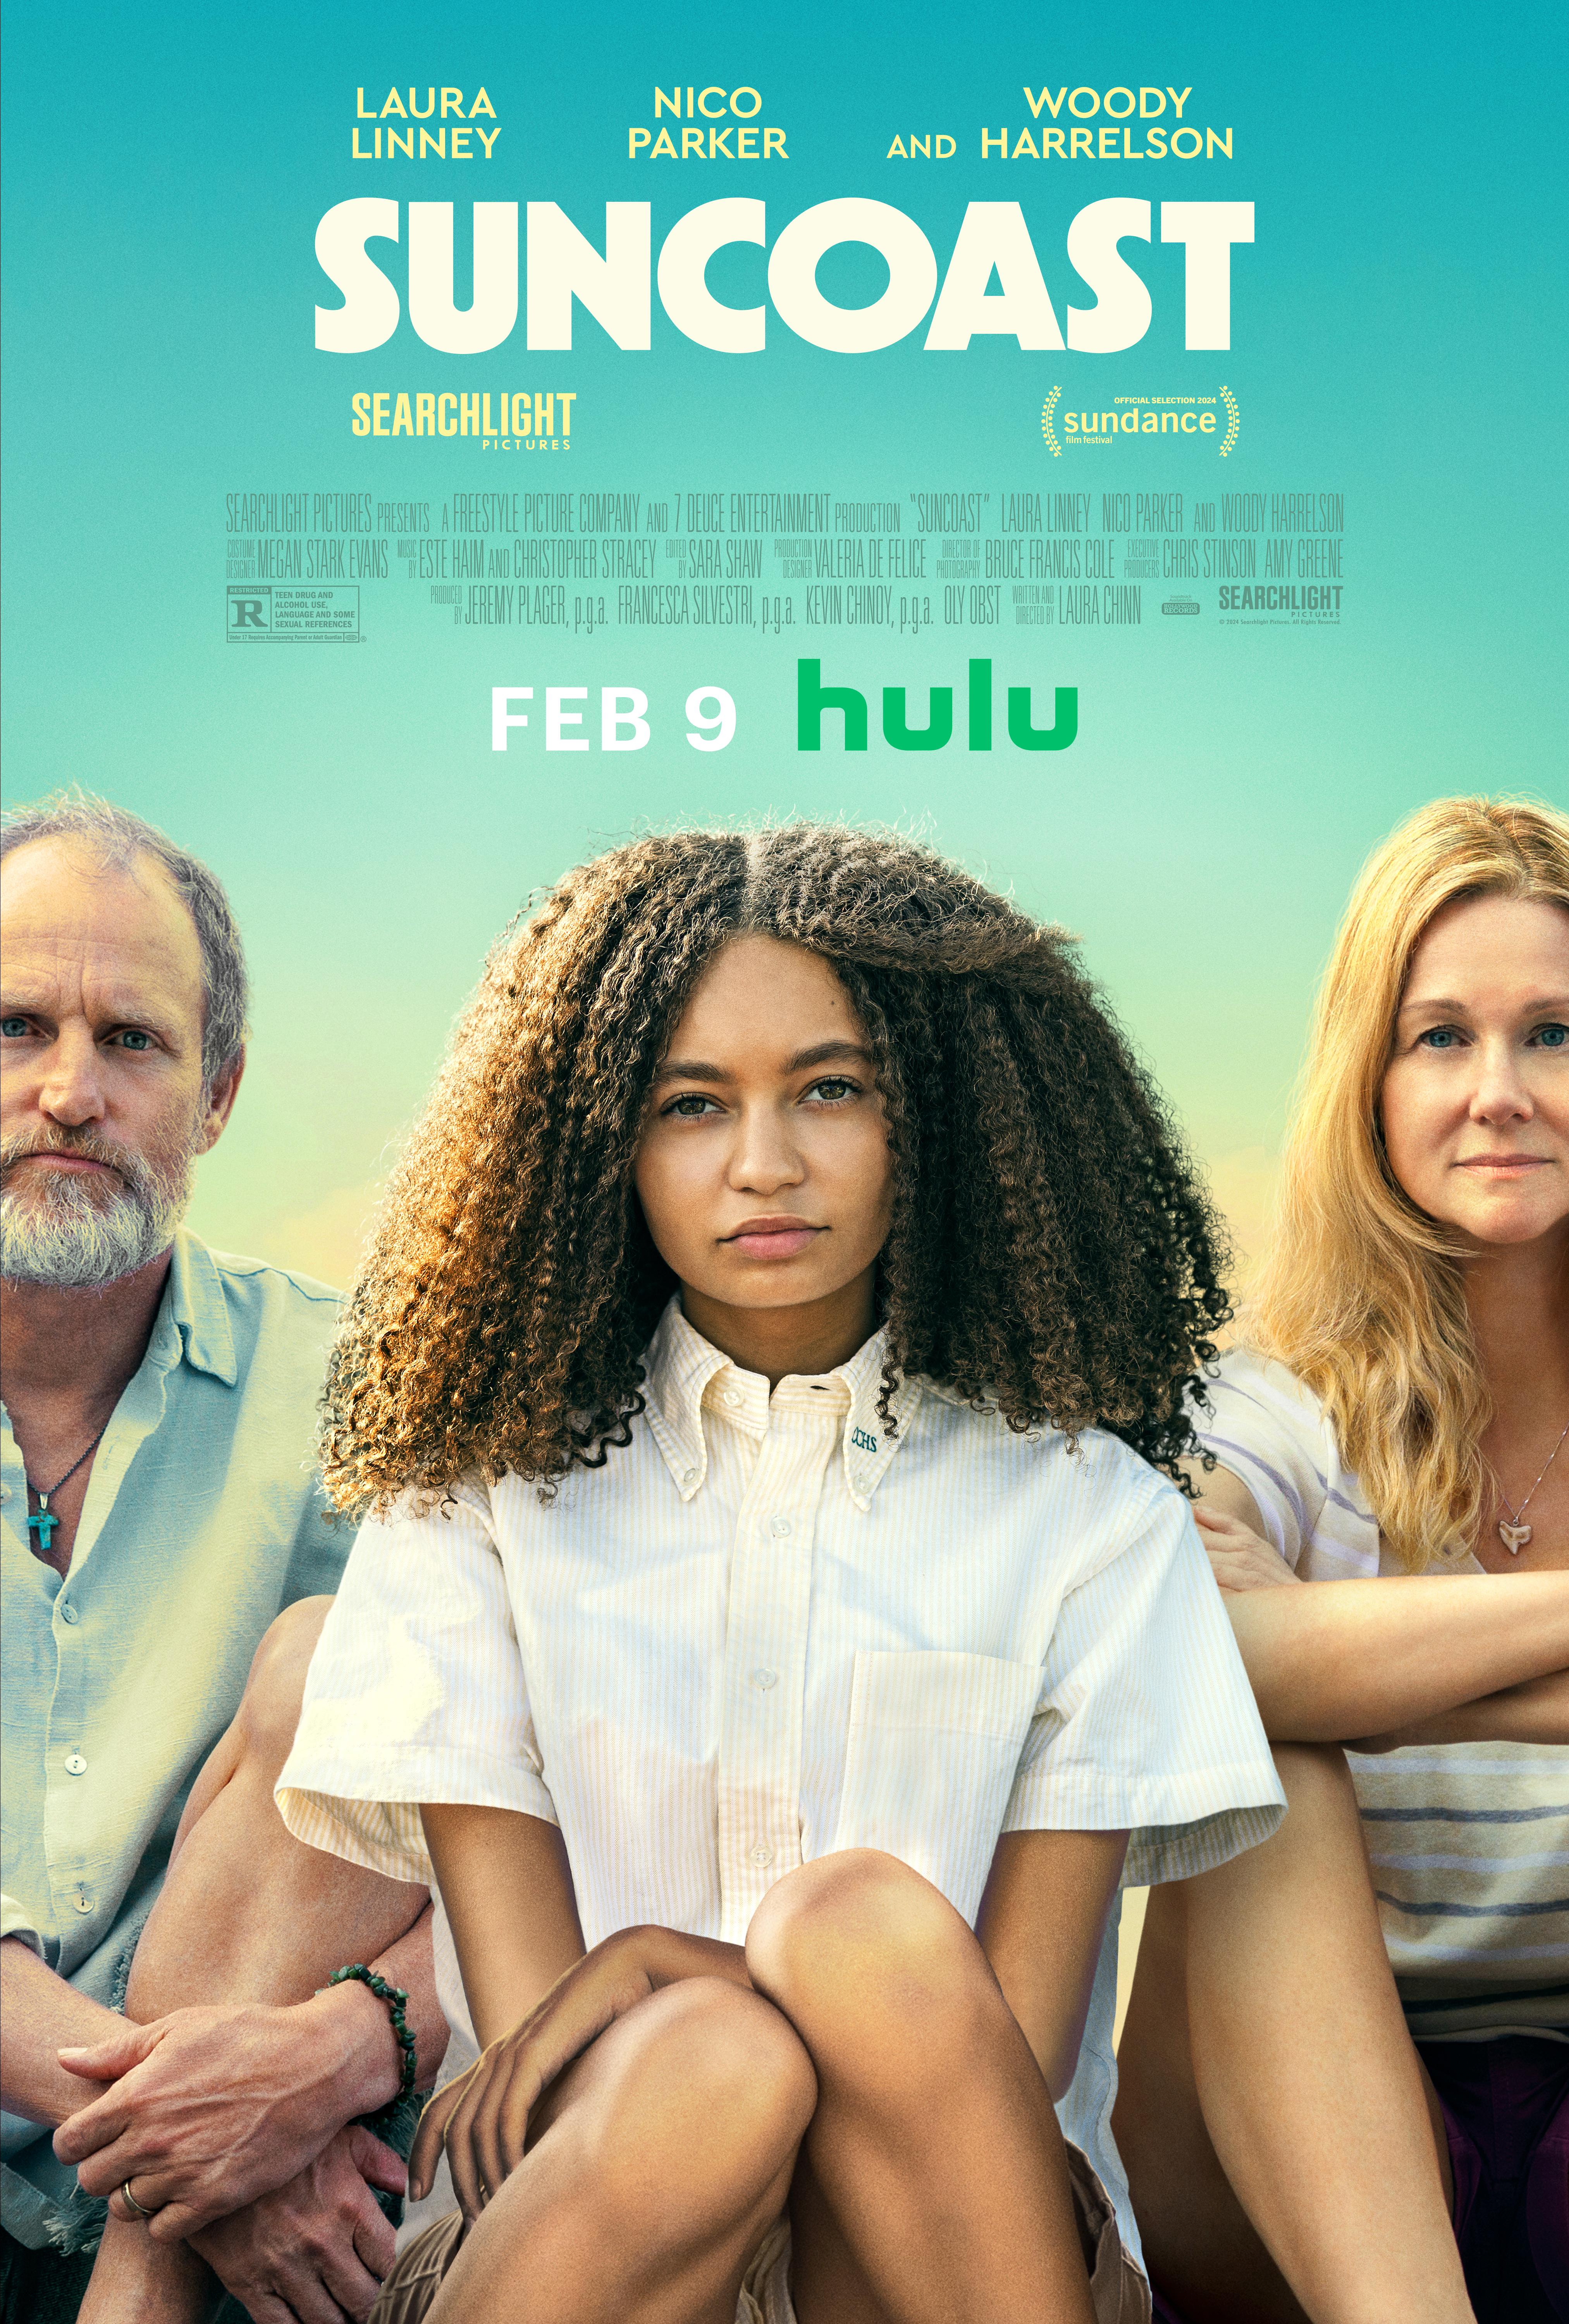 Suncoast (February 9) - Streaming on Disney+ HotstarSuncoast is a semi-autobiographical drama directed by Laura Chinn, exploring a young woman’s journey as she navigates the complexities of her brother’s serious illness alongside every aspect of being a teenager. Starring Laura Linney, Nico Parker, and Woody Harrelson, the film weaves a poignant coming-of-age story against the backdrop of real-life experiences.